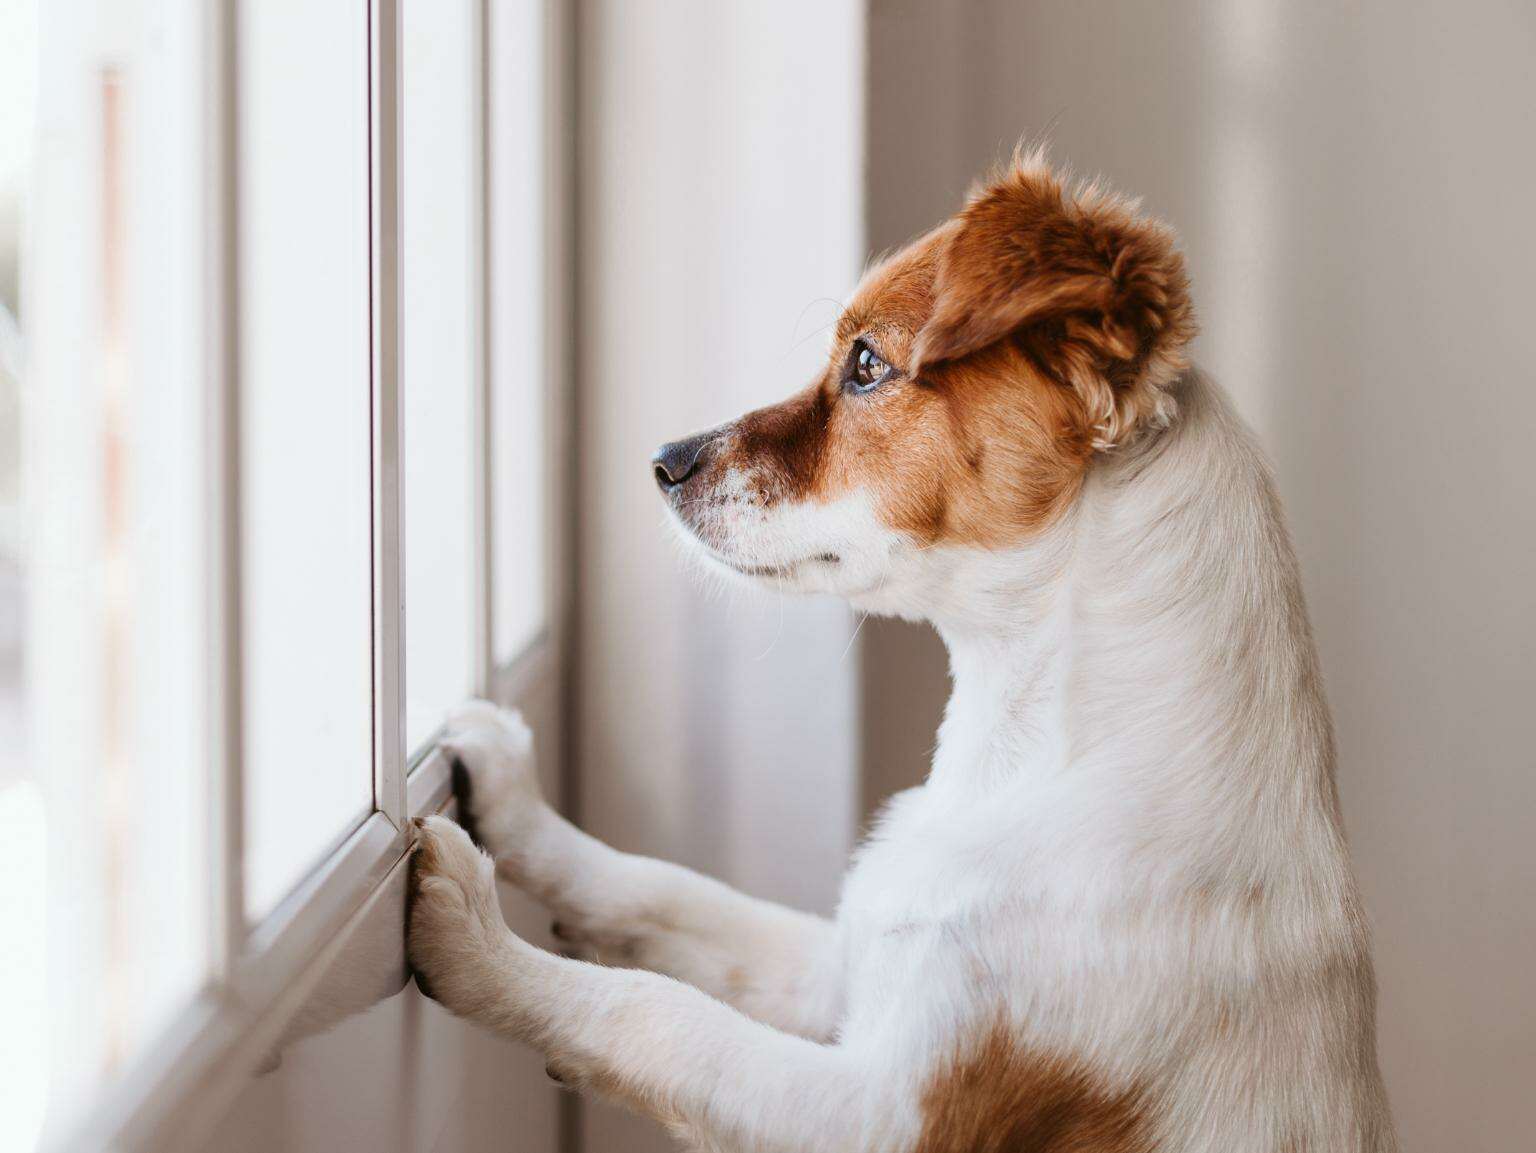 A puppy looking out of a window